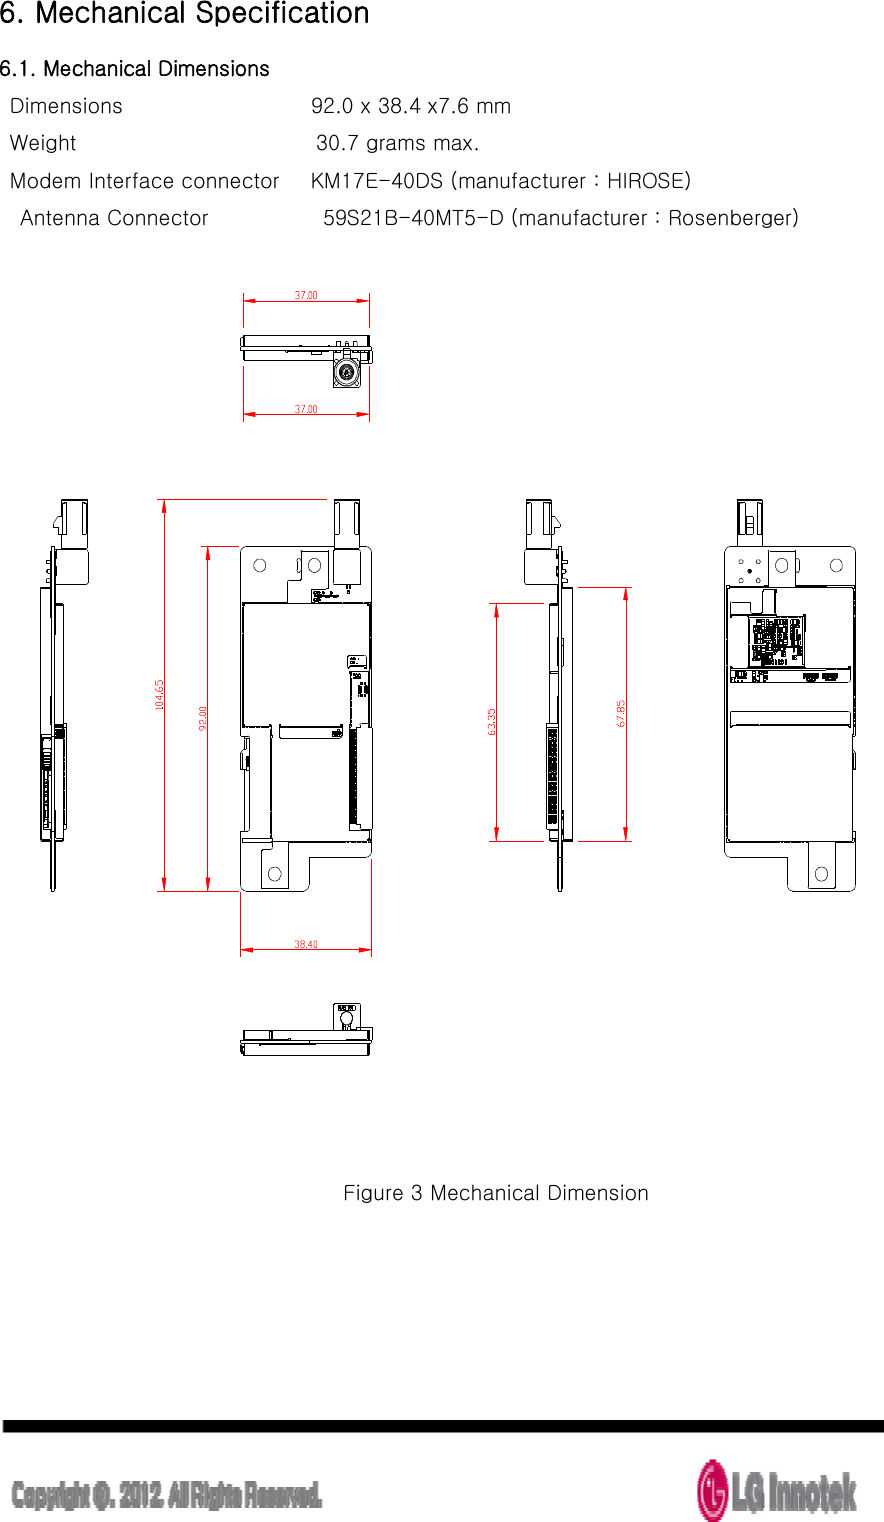  6. Mechanical Specification 6.1. Mechanical Dimensions   Dimensions                                    92.0 x 38.4 x7.6 mm   Weight                                              30.7 grams max.   Modem Interface connector      KM17E-40DS (manufacturer : HIROSE)     Antenna Connector                      59S21B-40MT5-D (manufacturer : Rosenberger)      Figure 3 Mechanical Dimension 